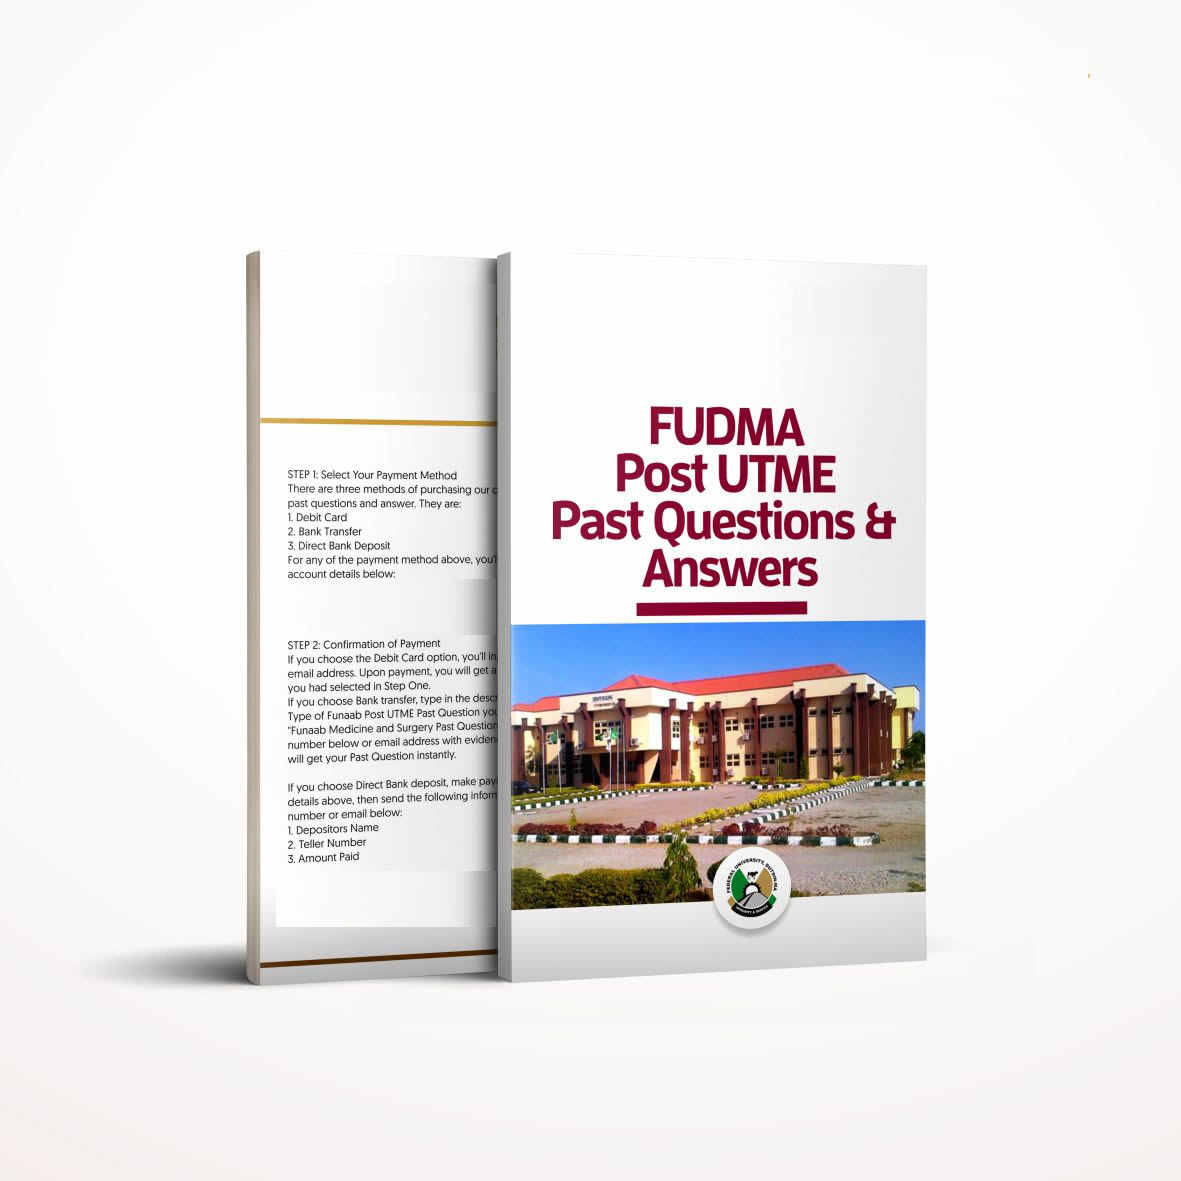 FUDMA Post UTME past questions and answers